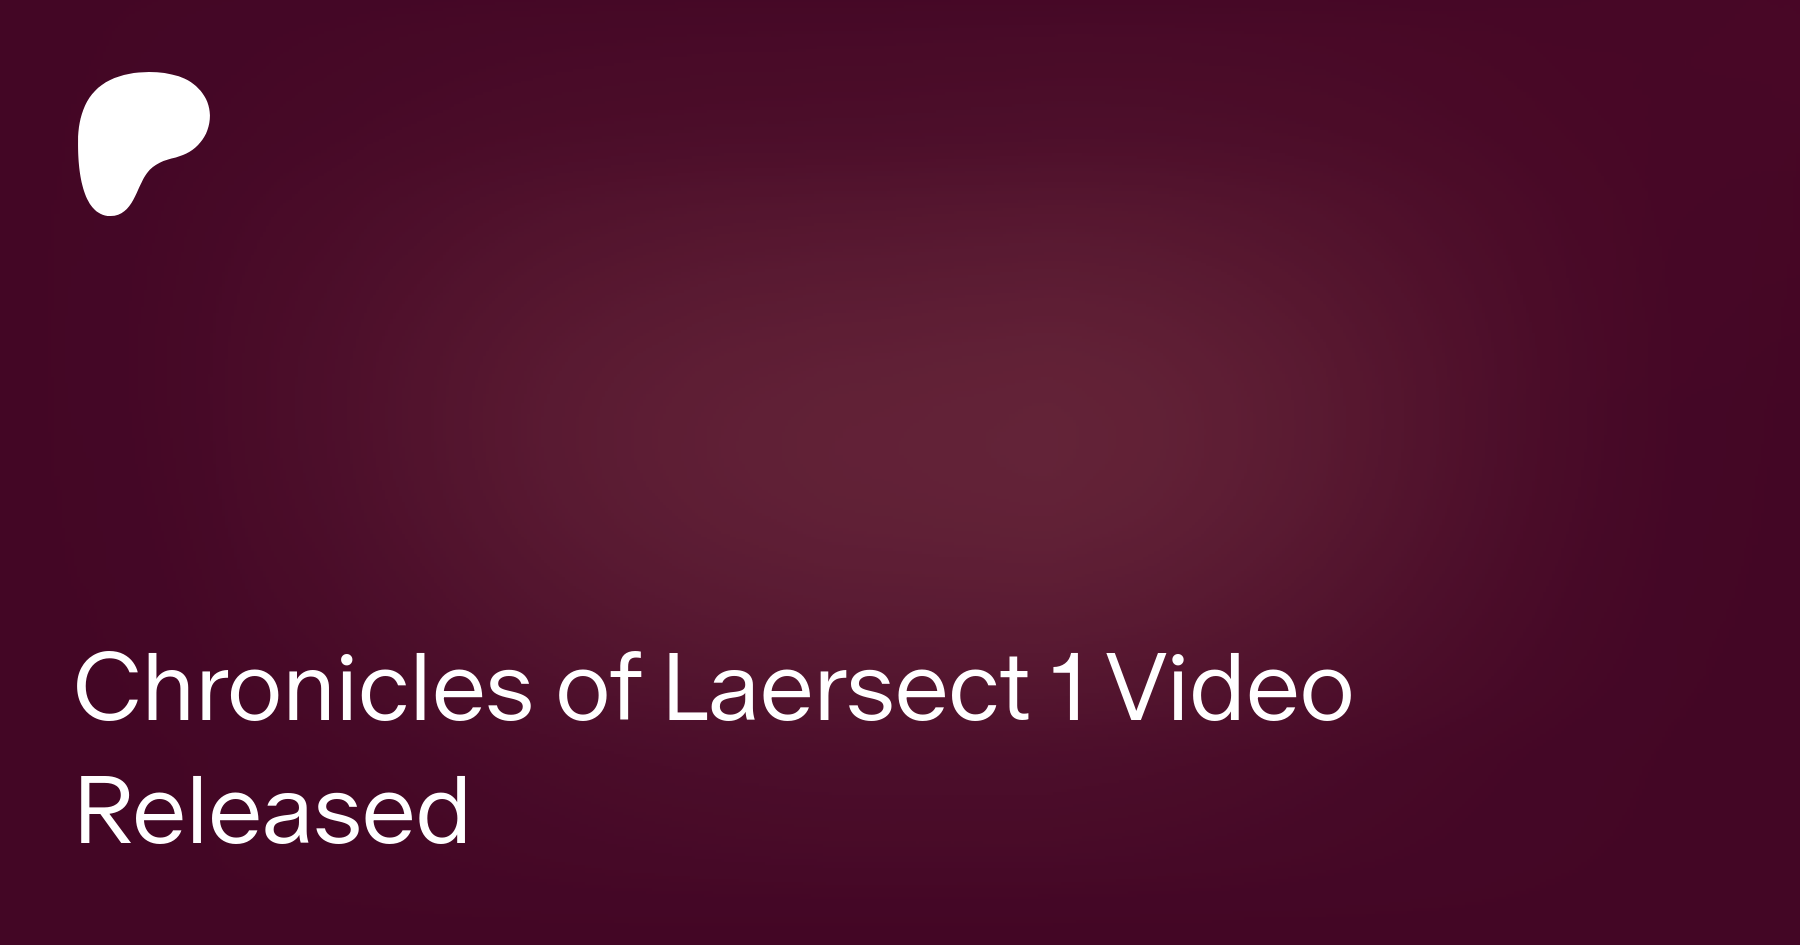 Laersect